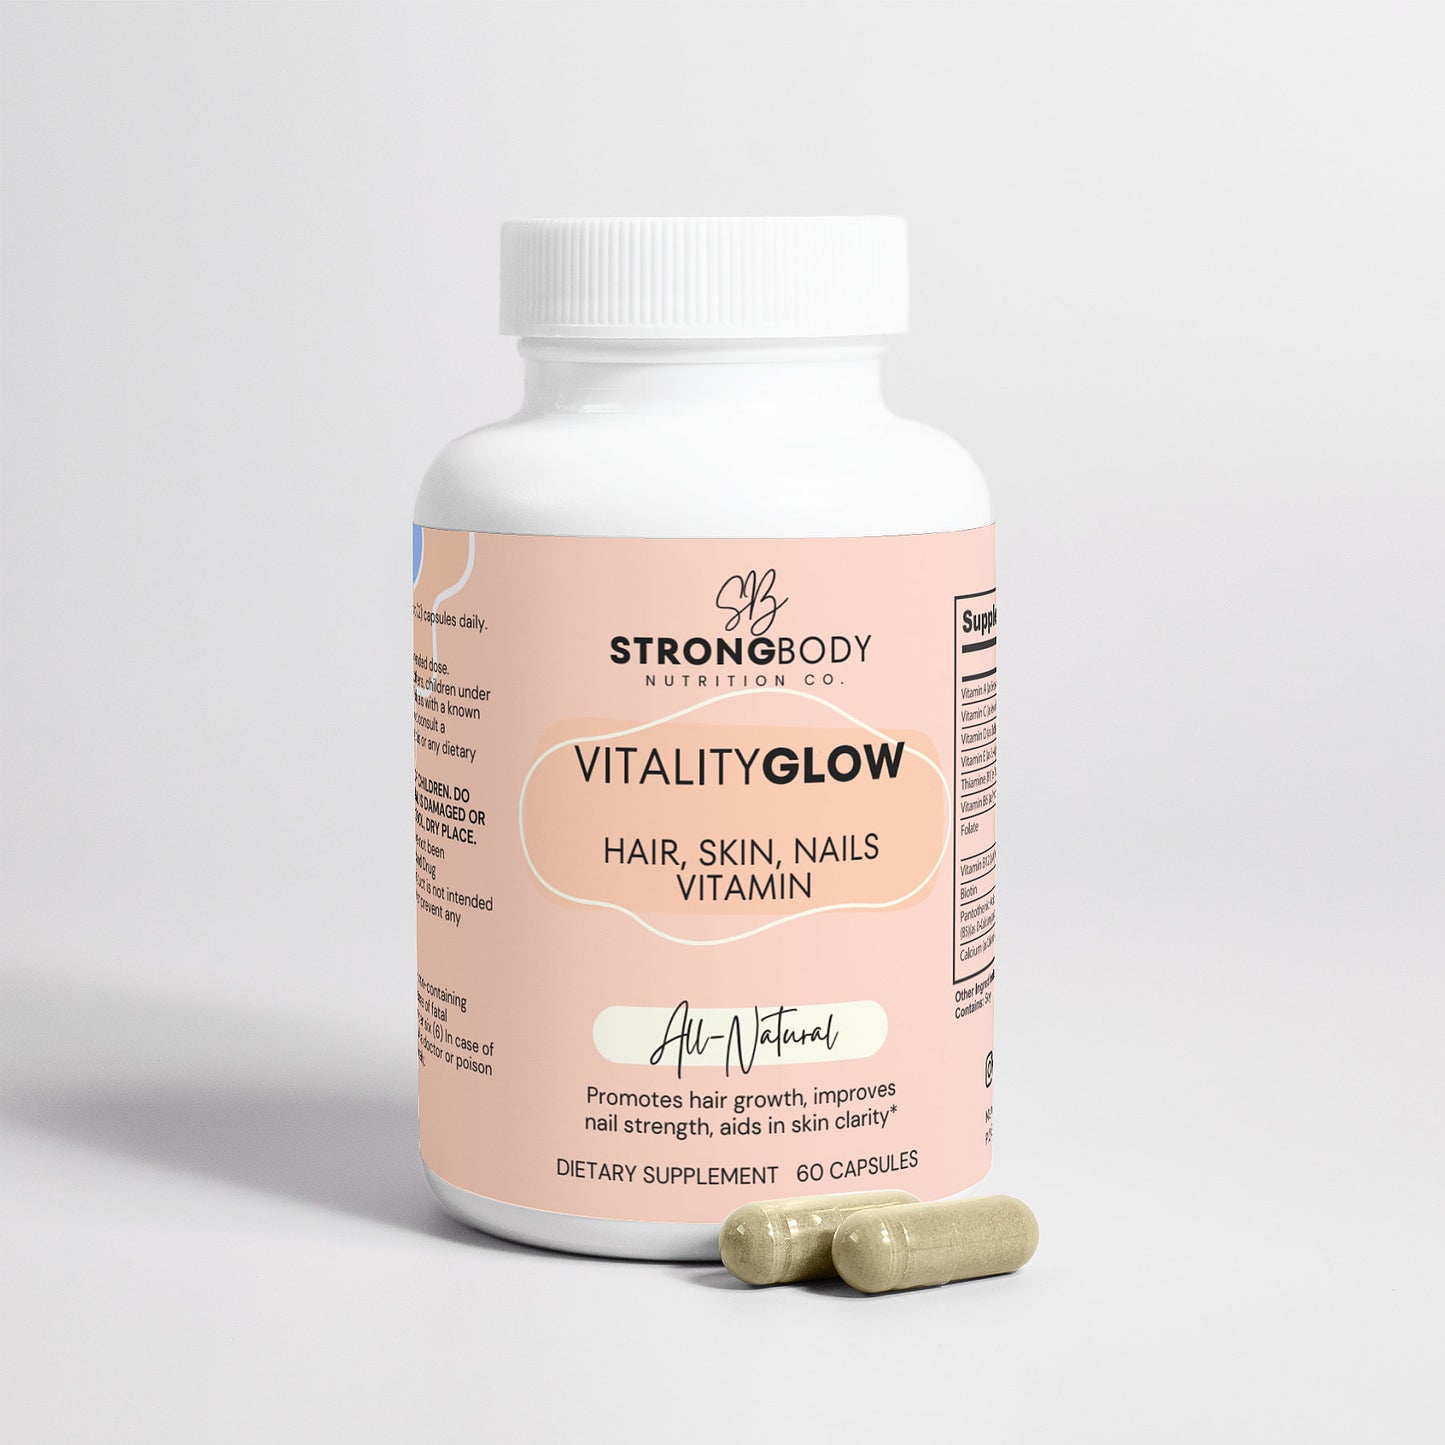 VitalityGlow Hair, Skin and Nails Supplement